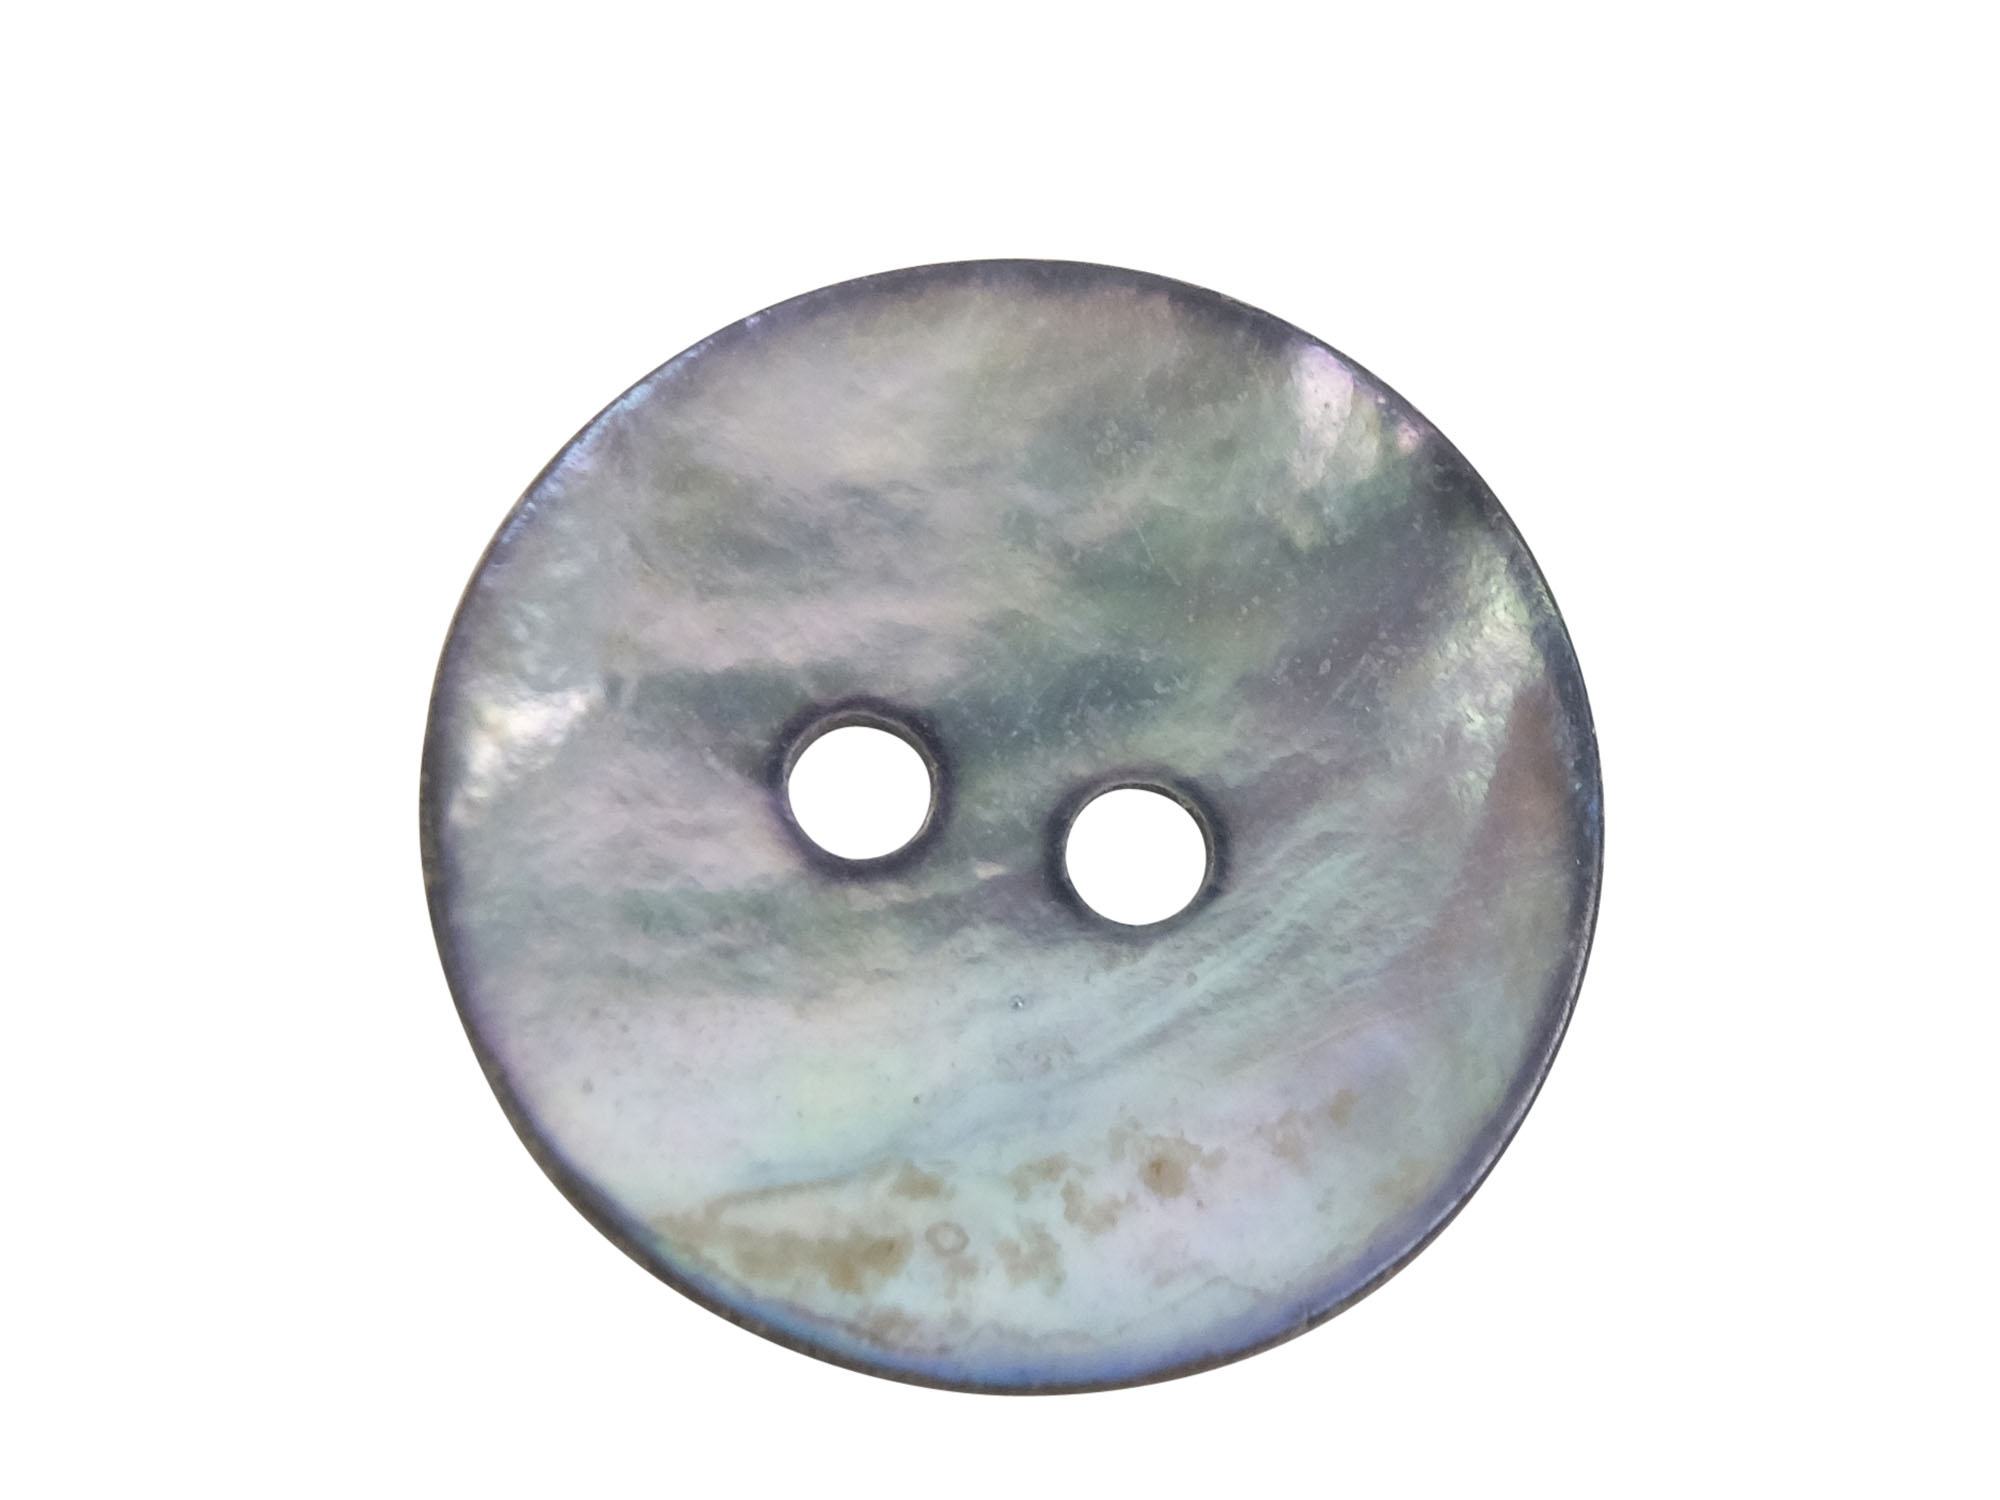 Smoked Akoya Mother of Pearl Button: 24L (15mm or 0.590") mother-of-pearl buttons, mother of pearl shell buttons, nacre, acoya, agoya